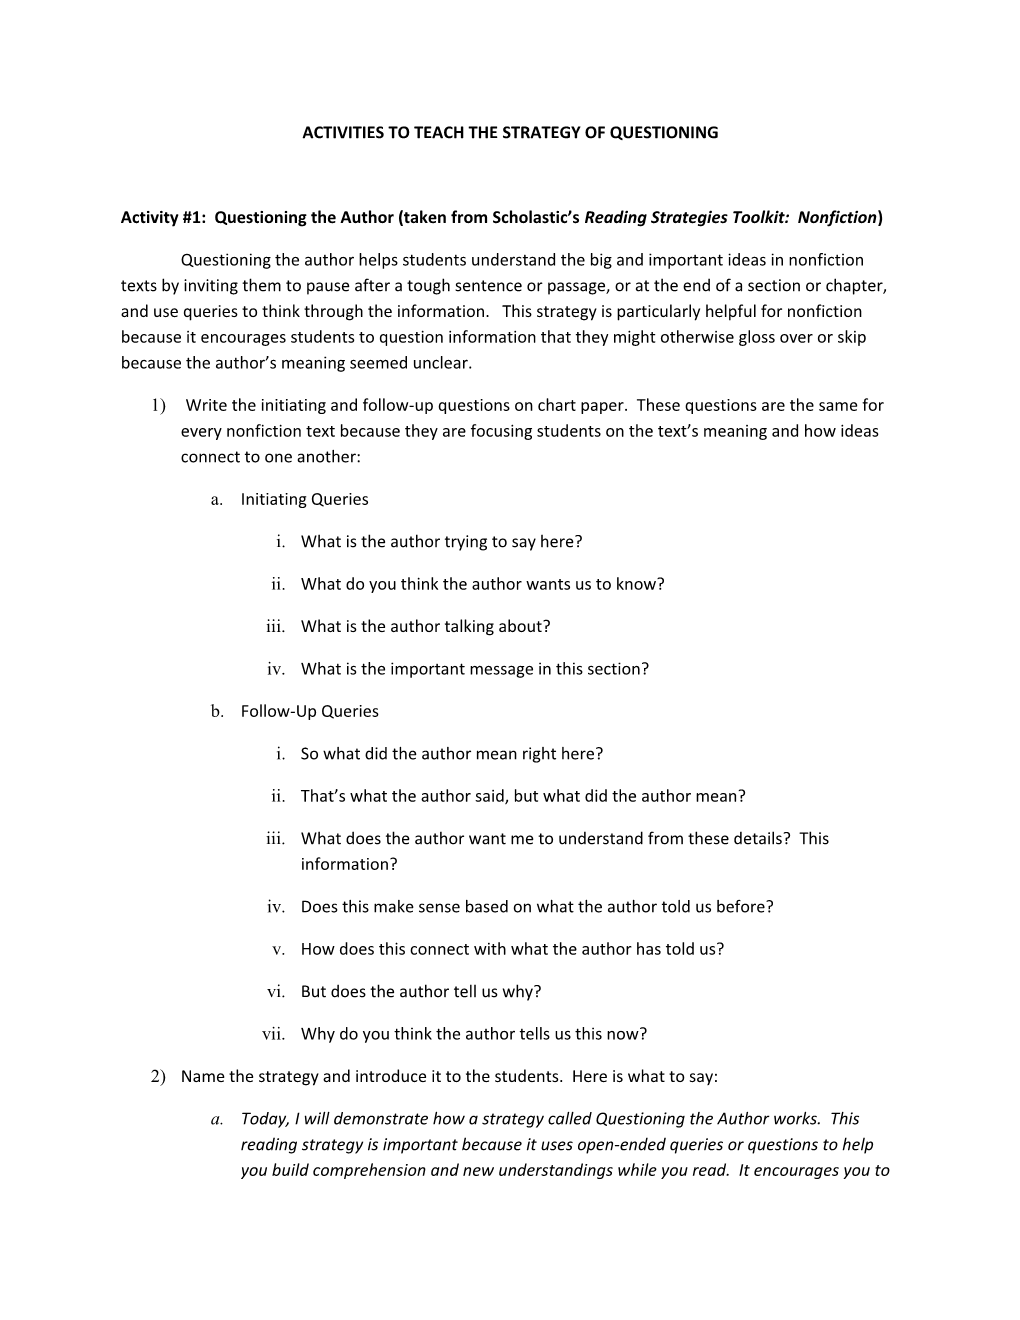 Activities to Teach the Strategy of Questioning